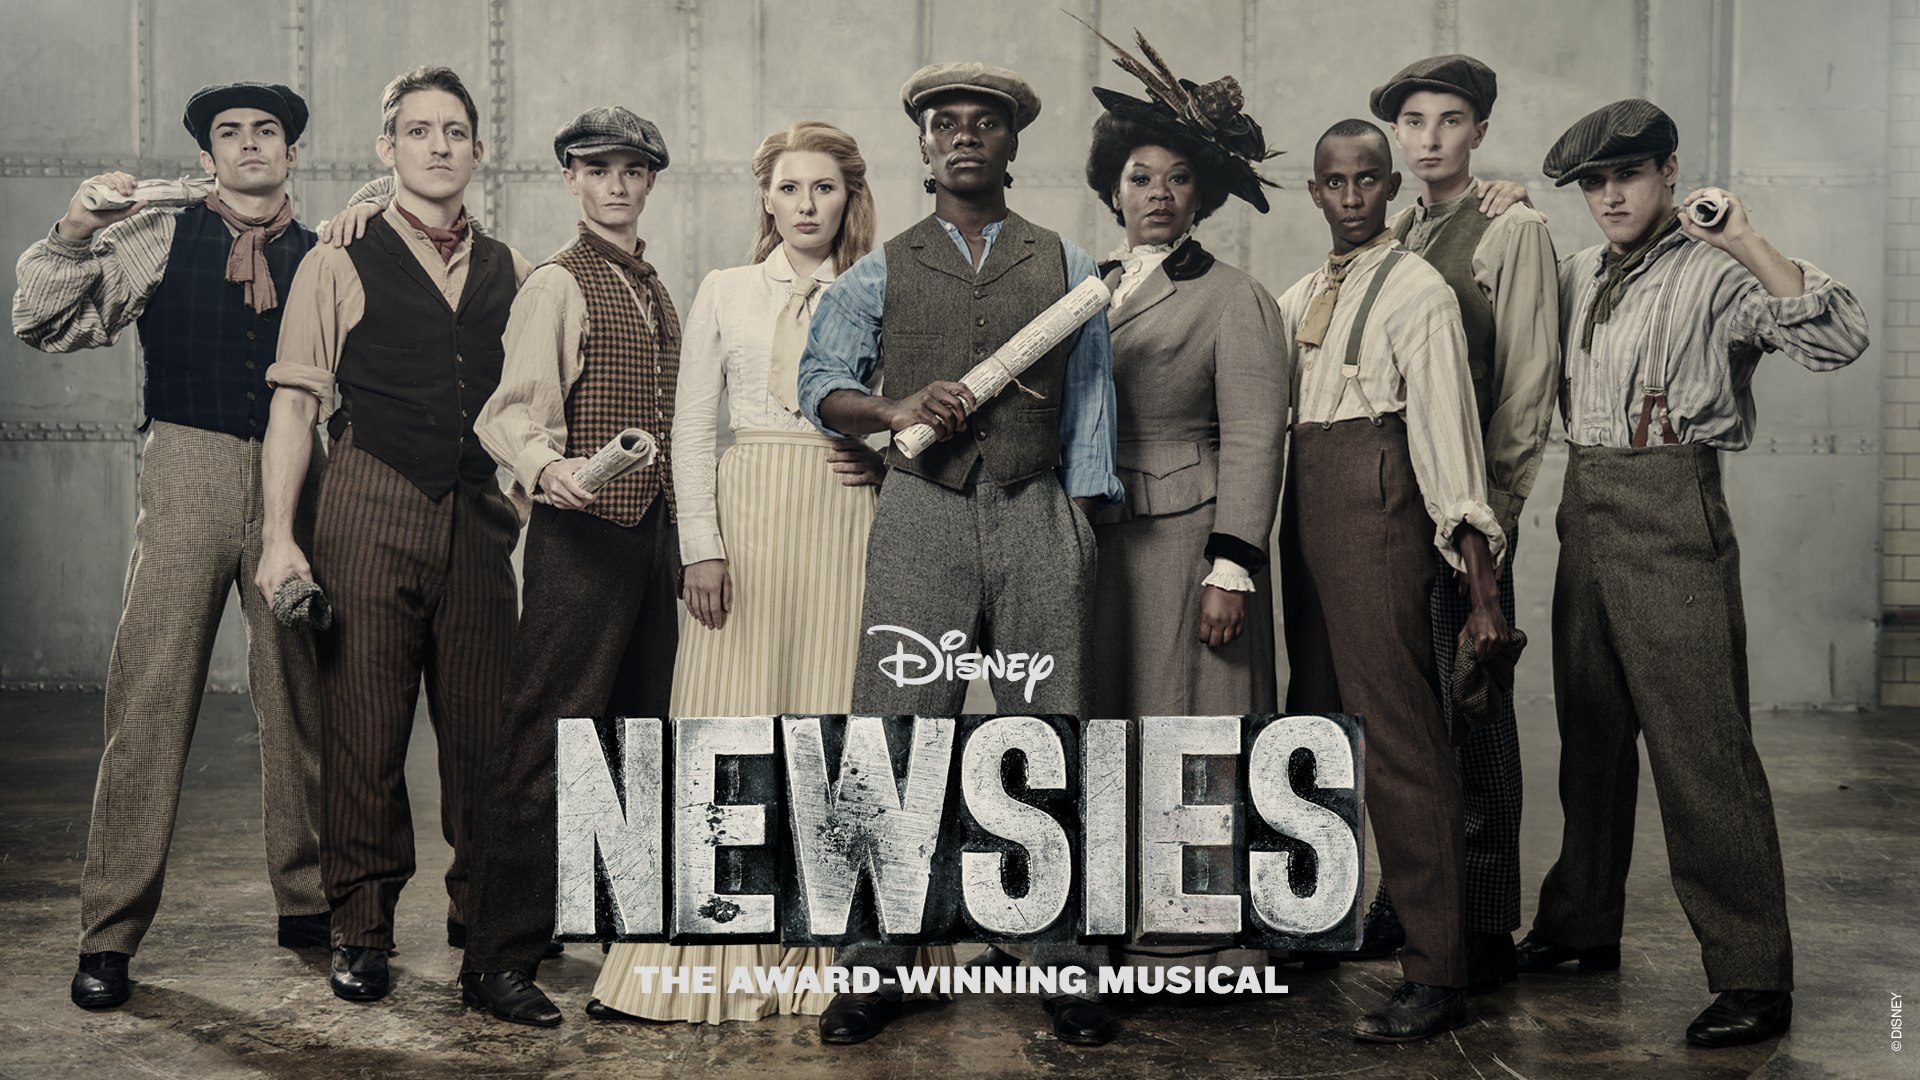 Full Cast Announced for Newsies at Troubadour Wembley Park Theatre